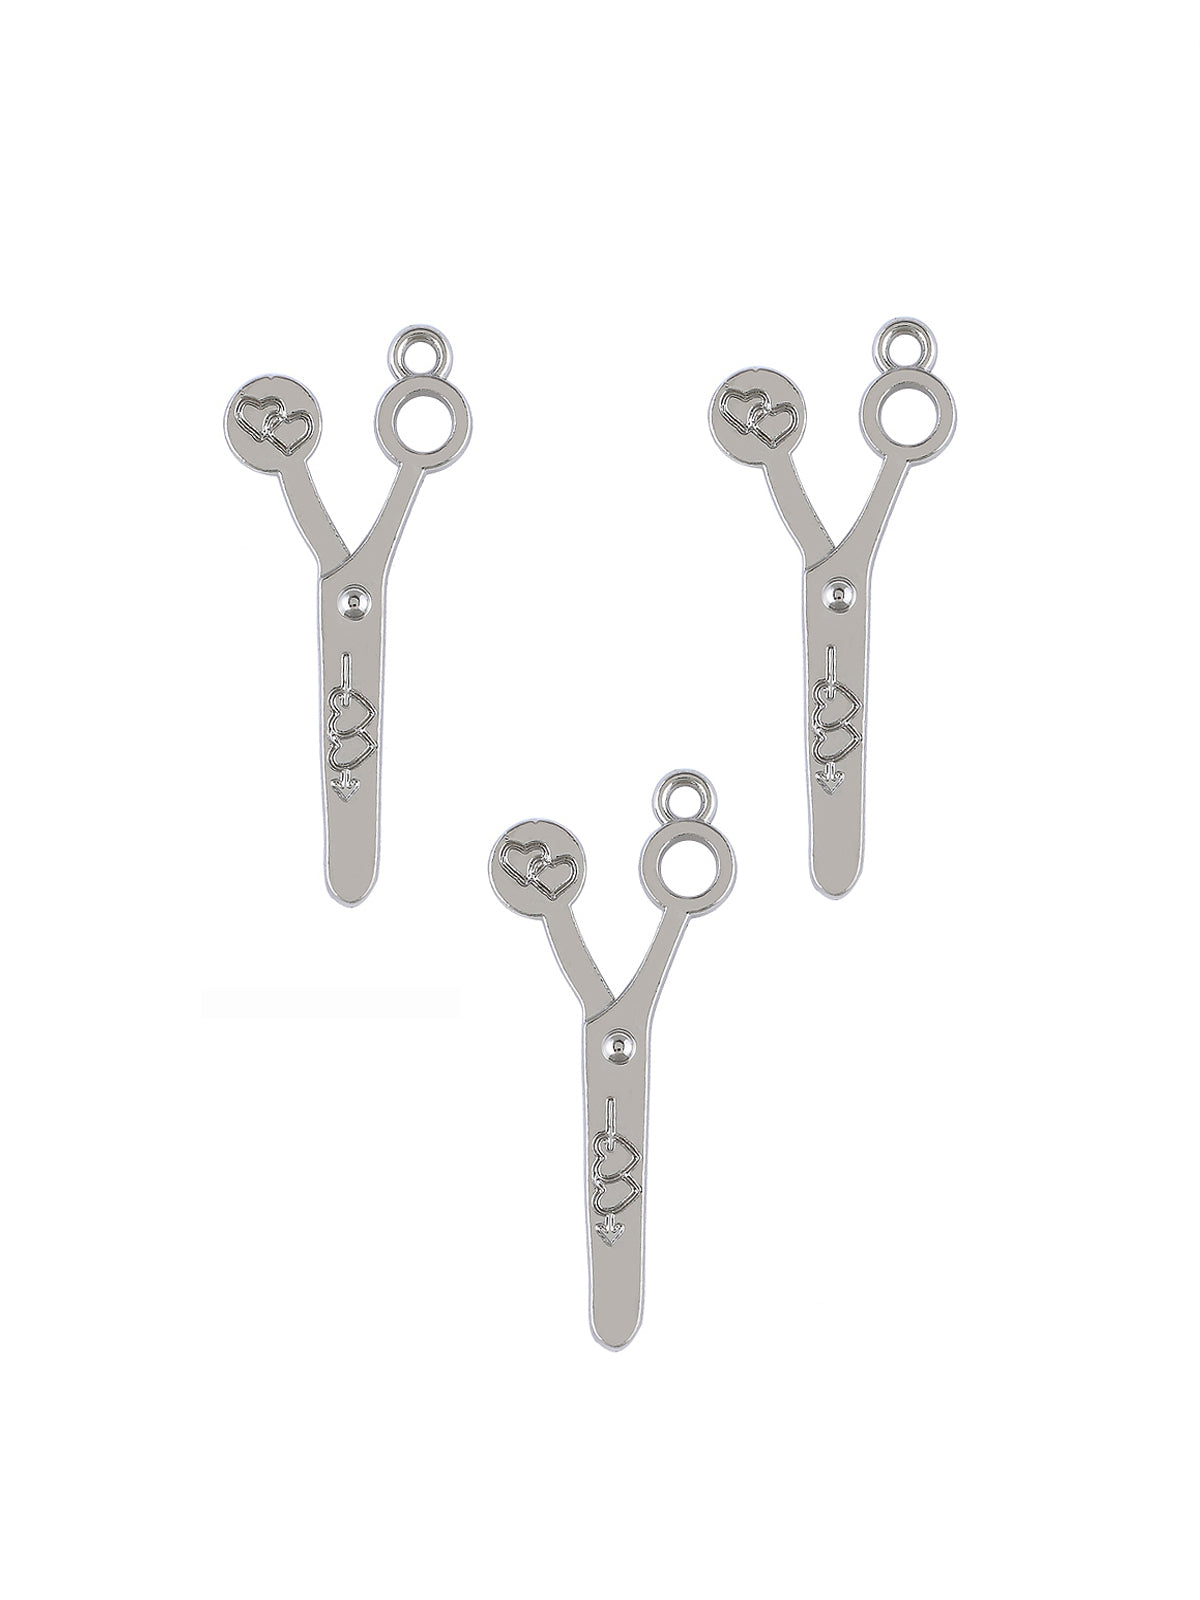 Hairdresser Scissors Fashion Accessory Hardware in Shiny Silver Color